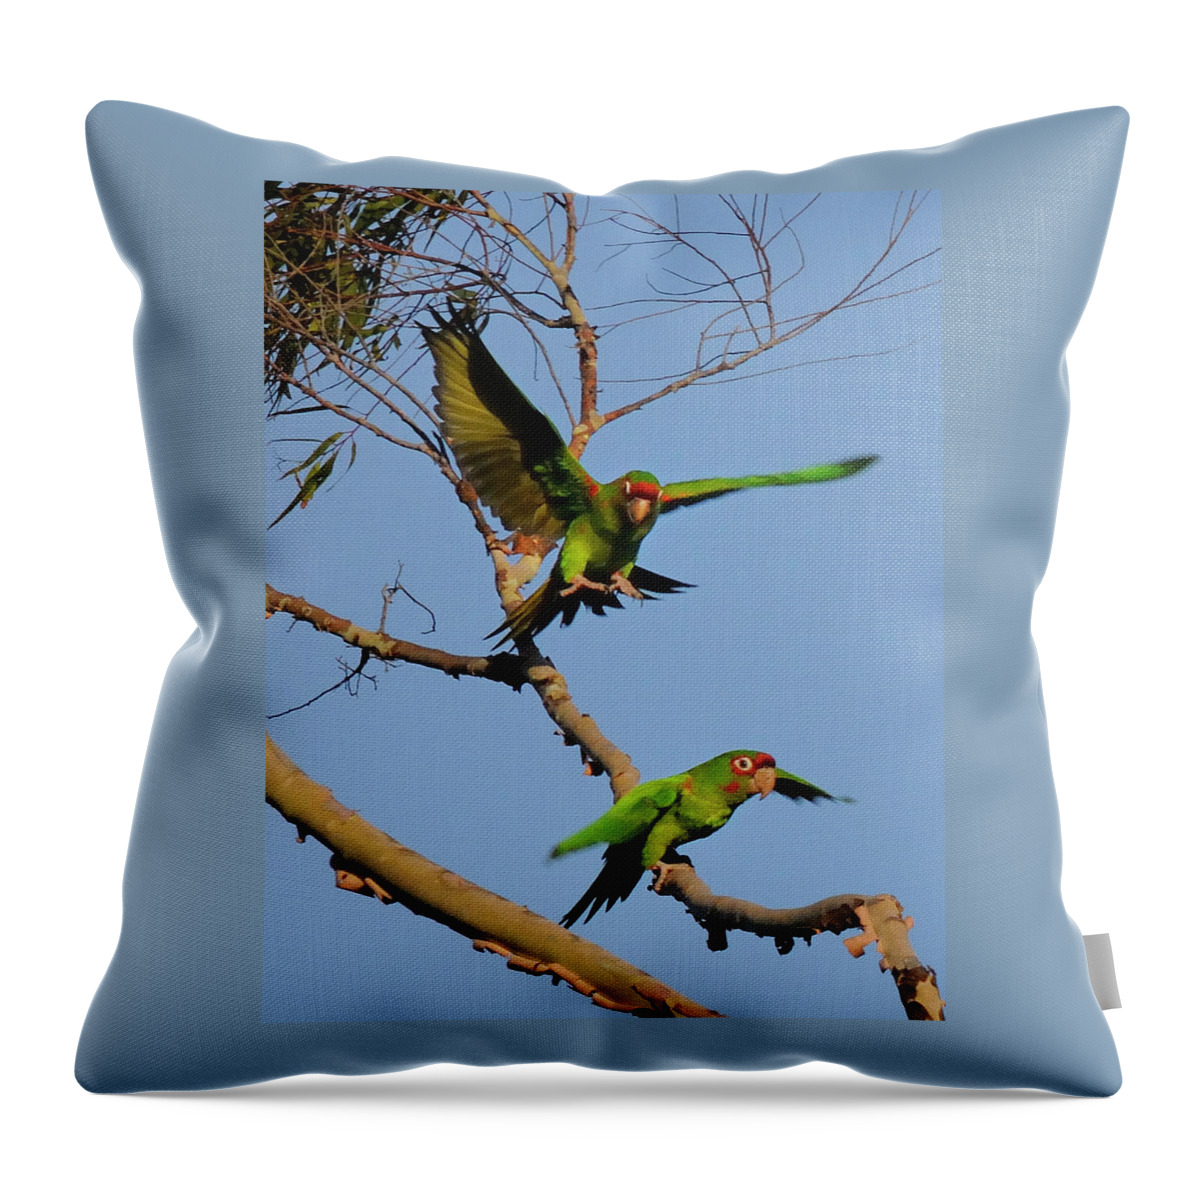 Parrots Throw Pillow featuring the photograph Parrots by Marc Bittan